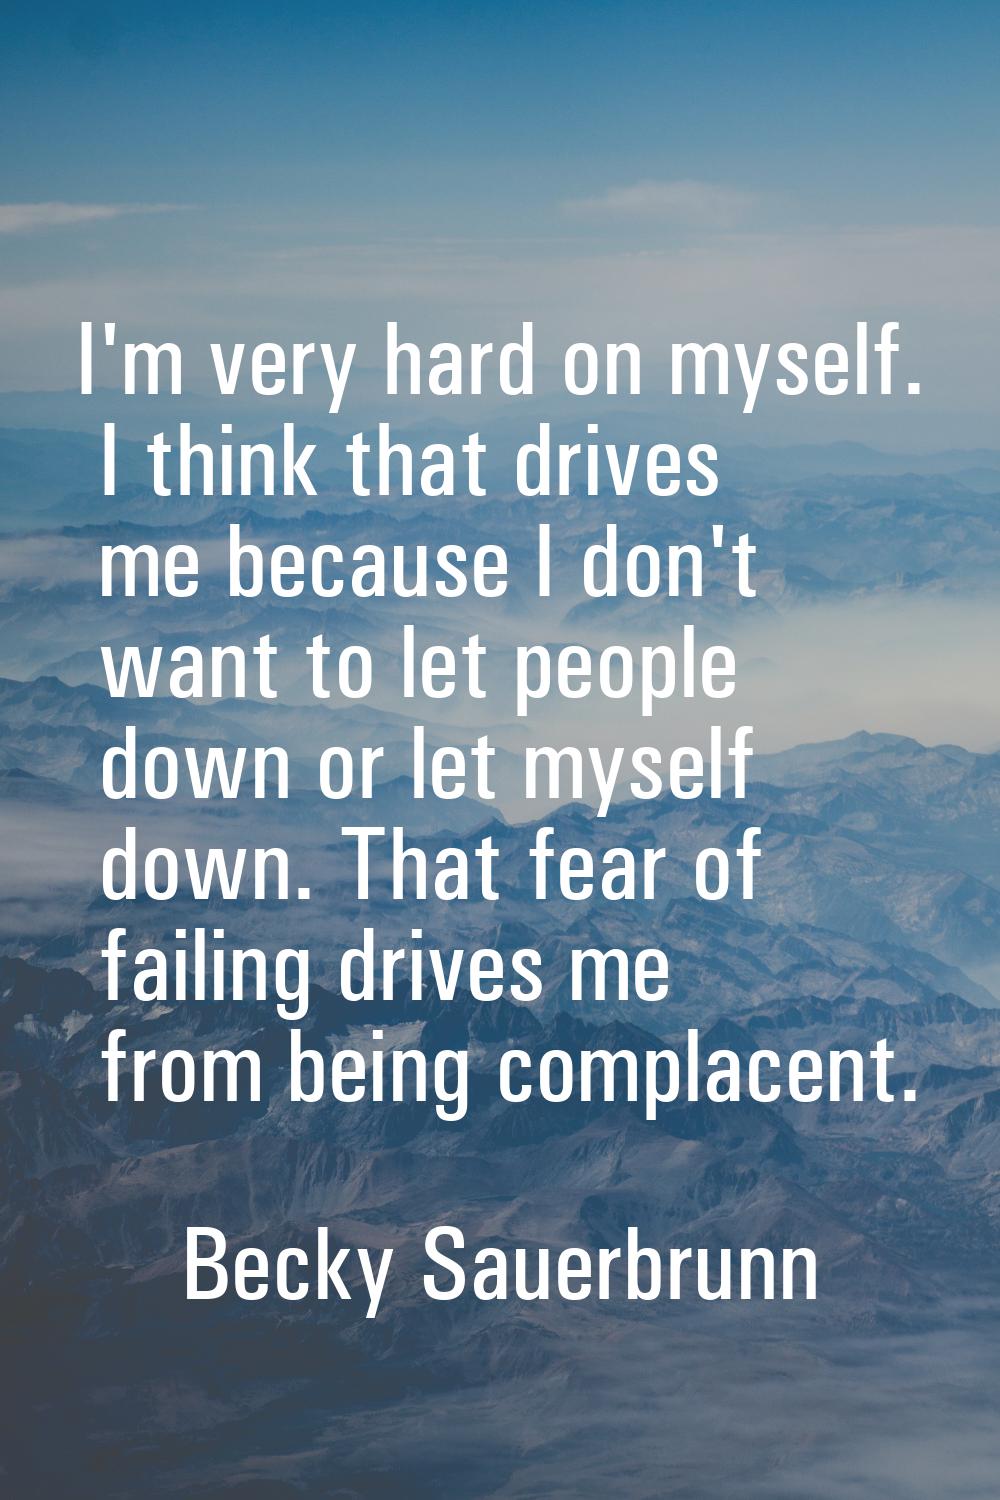 I'm very hard on myself. I think that drives me because I don't want to let people down or let myse